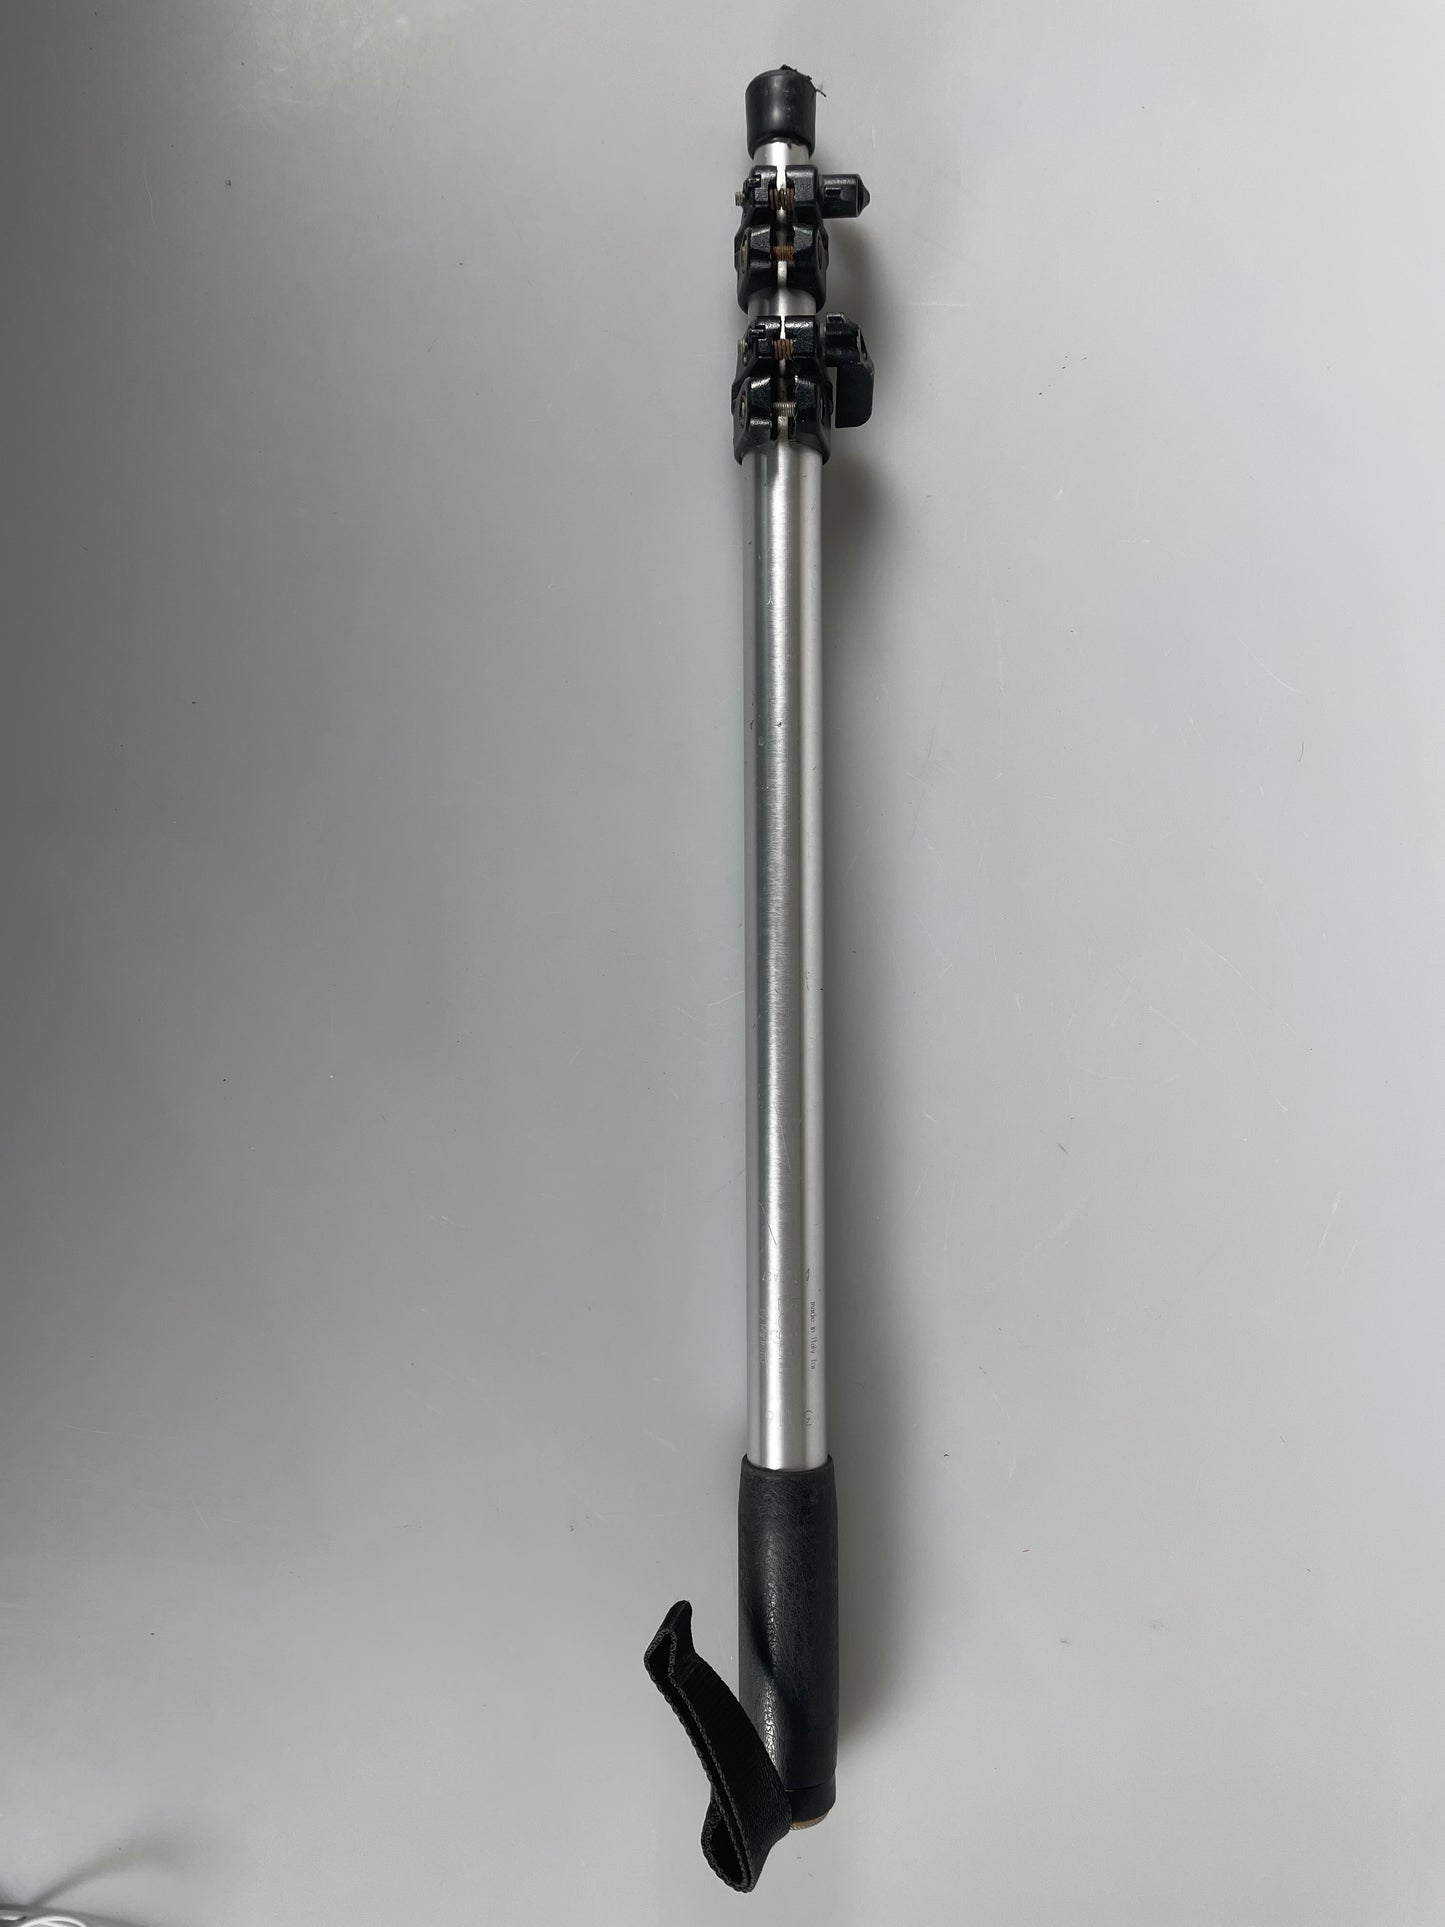 BOGEN Monopod Professional Model 3016 by Manfrotto